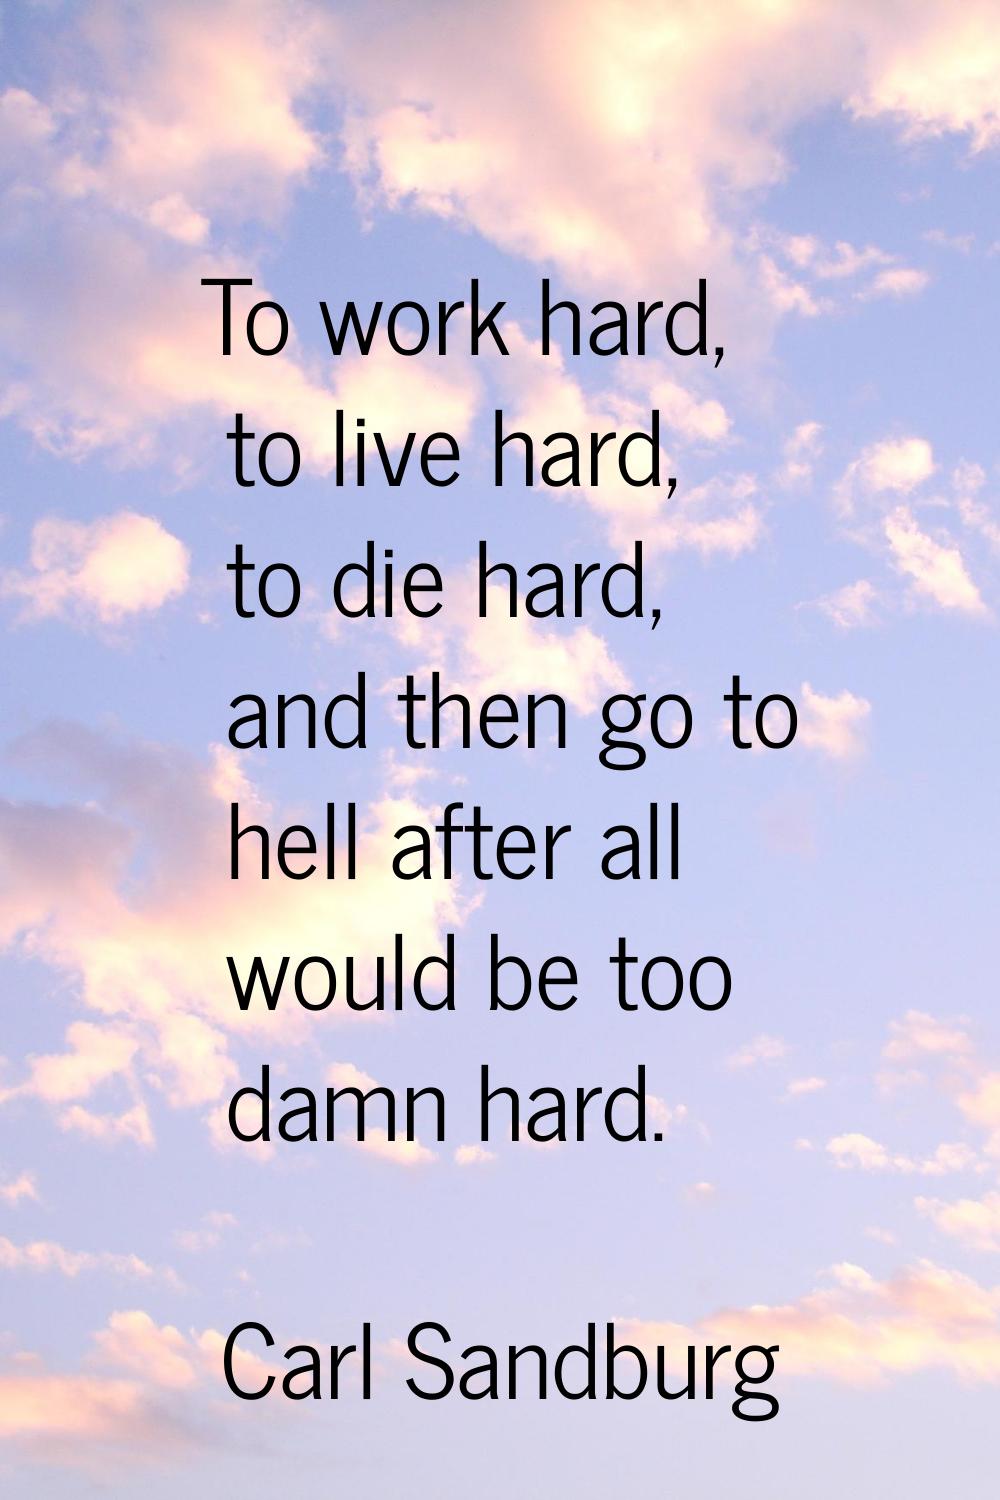 To work hard, to live hard, to die hard, and then go to hell after all would be too damn hard.